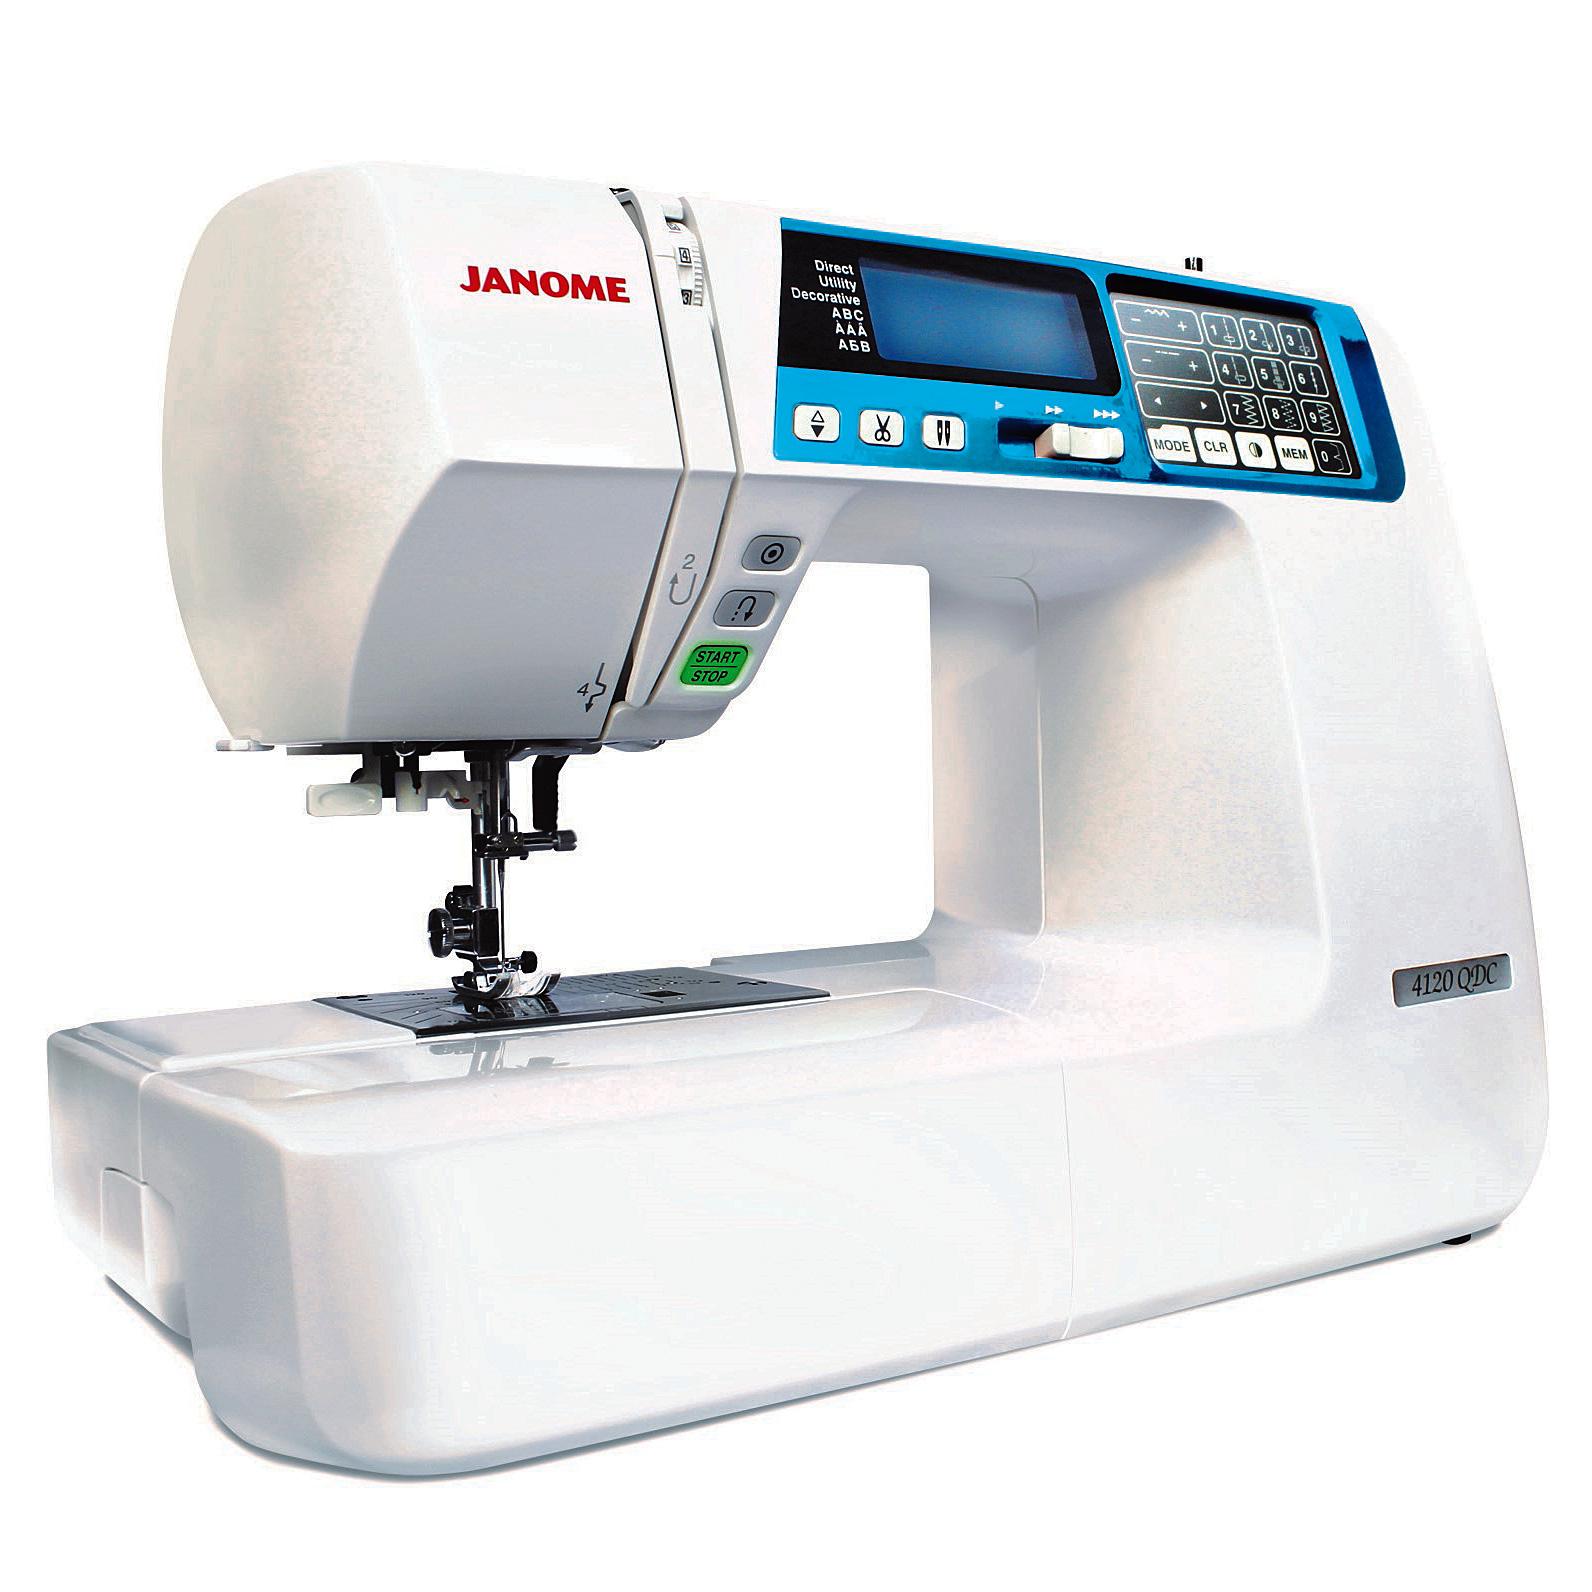 Janome 4120 QDC-G Sewing & Quilting Machine - FREE SHIPPING!